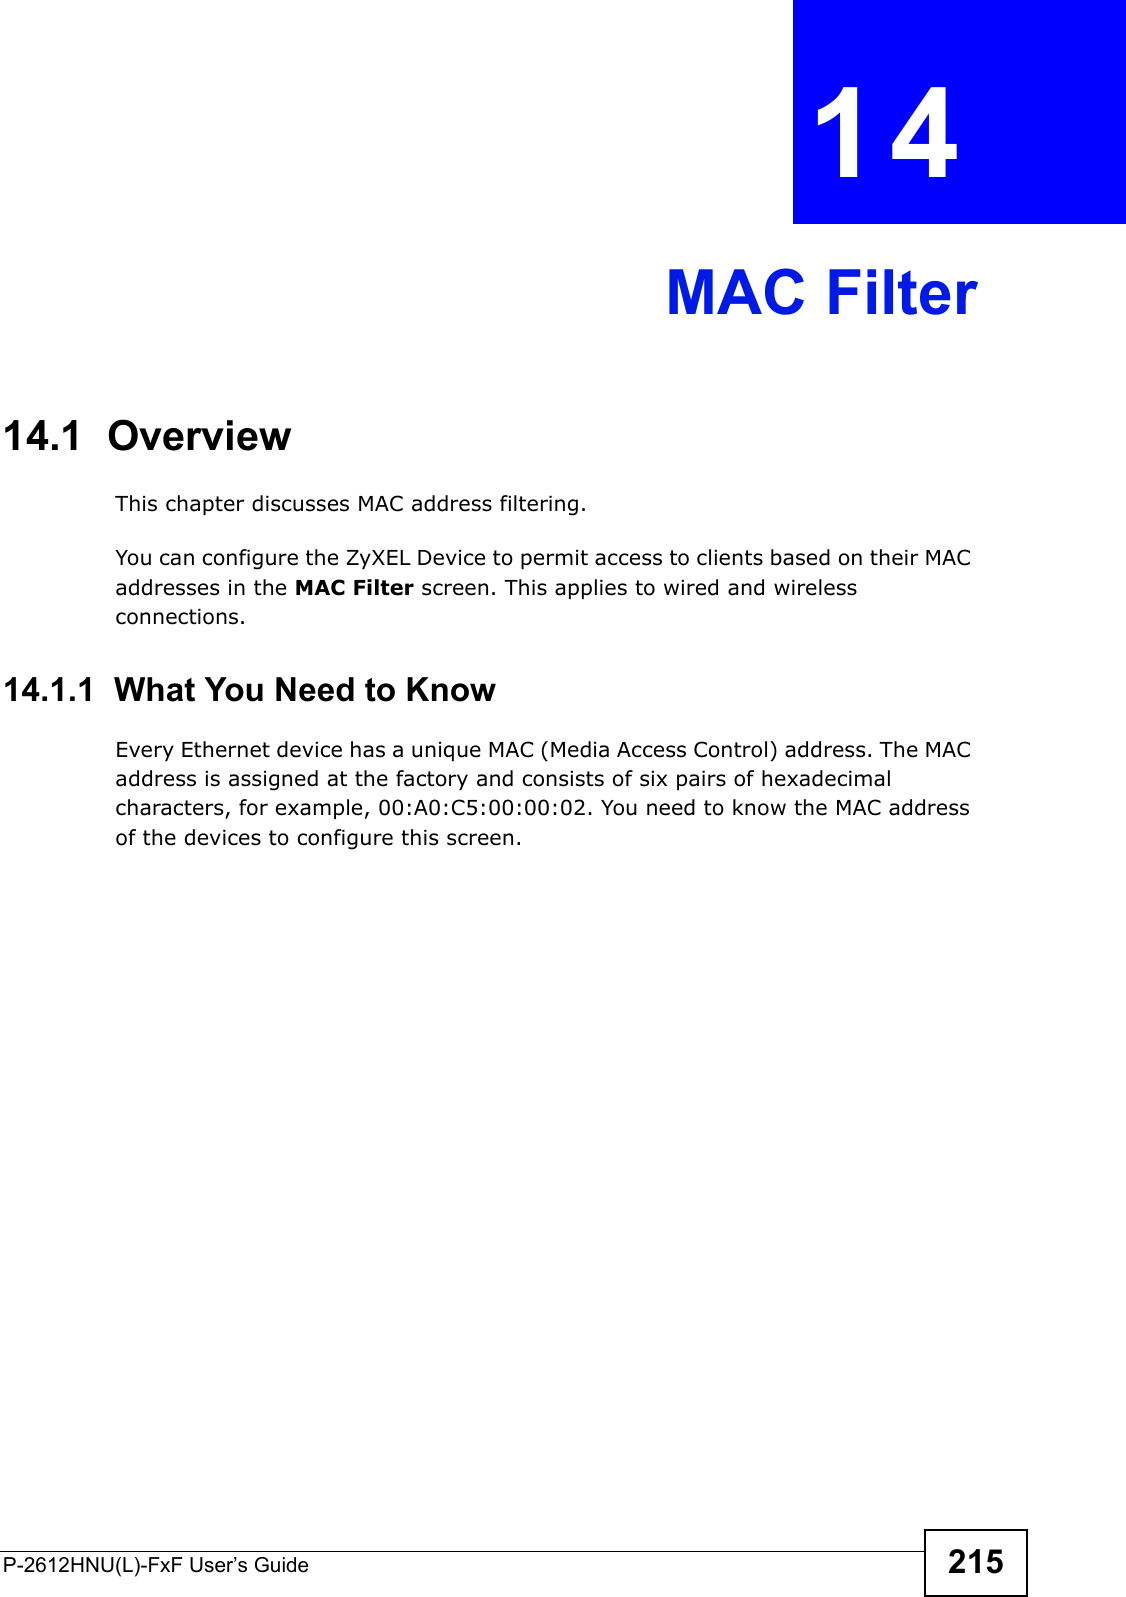 P-2612HNU(L)-FxF User’s Guide 215CHAPTER   14 MAC Filter14.1  OverviewThis chapter discusses MAC address filtering.You can configure the ZyXEL Device to permit access to clients based on their MAC addresses in the MAC Filter screen. This applies to wired and wireless connections.14.1.1  What You Need to KnowEvery Ethernet device has a unique MAC (Media Access Control) address. The MAC address is assigned at the factory and consists of six pairs of hexadecimal characters, for example, 00:A0:C5:00:00:02. You need to know the MAC address of the devices to configure this screen.